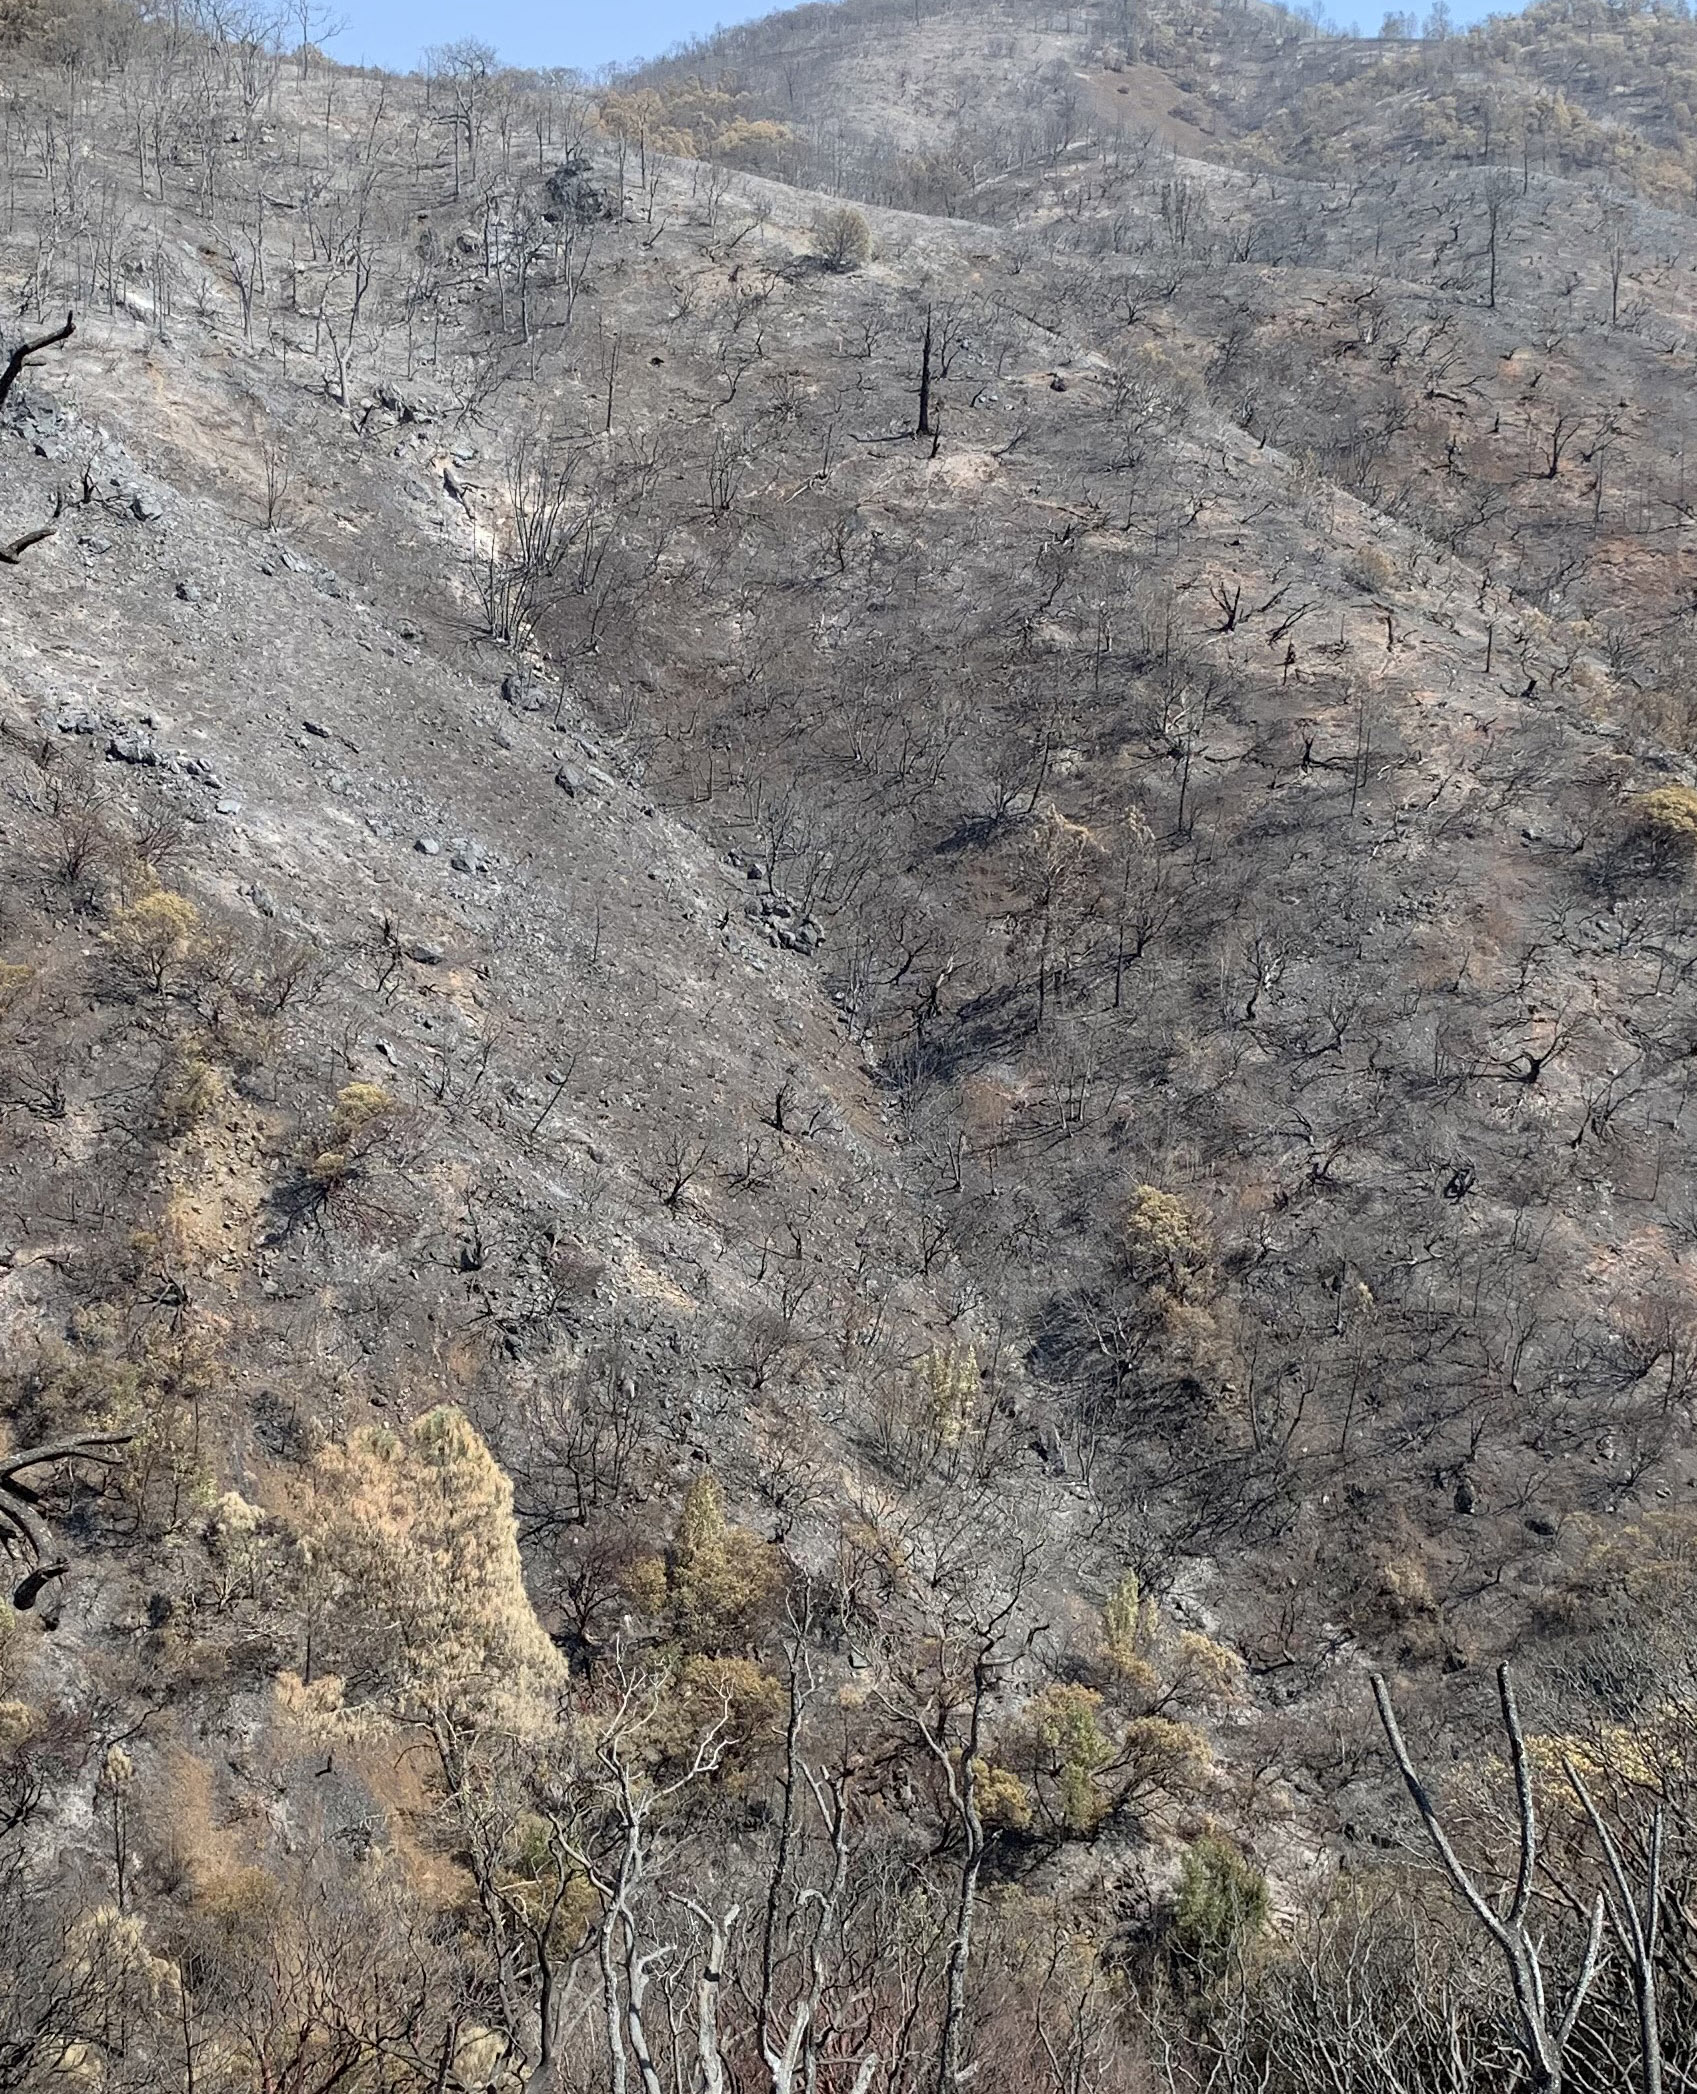 A steep gully denuded by fire. Bare soil and boulders are all that remain.